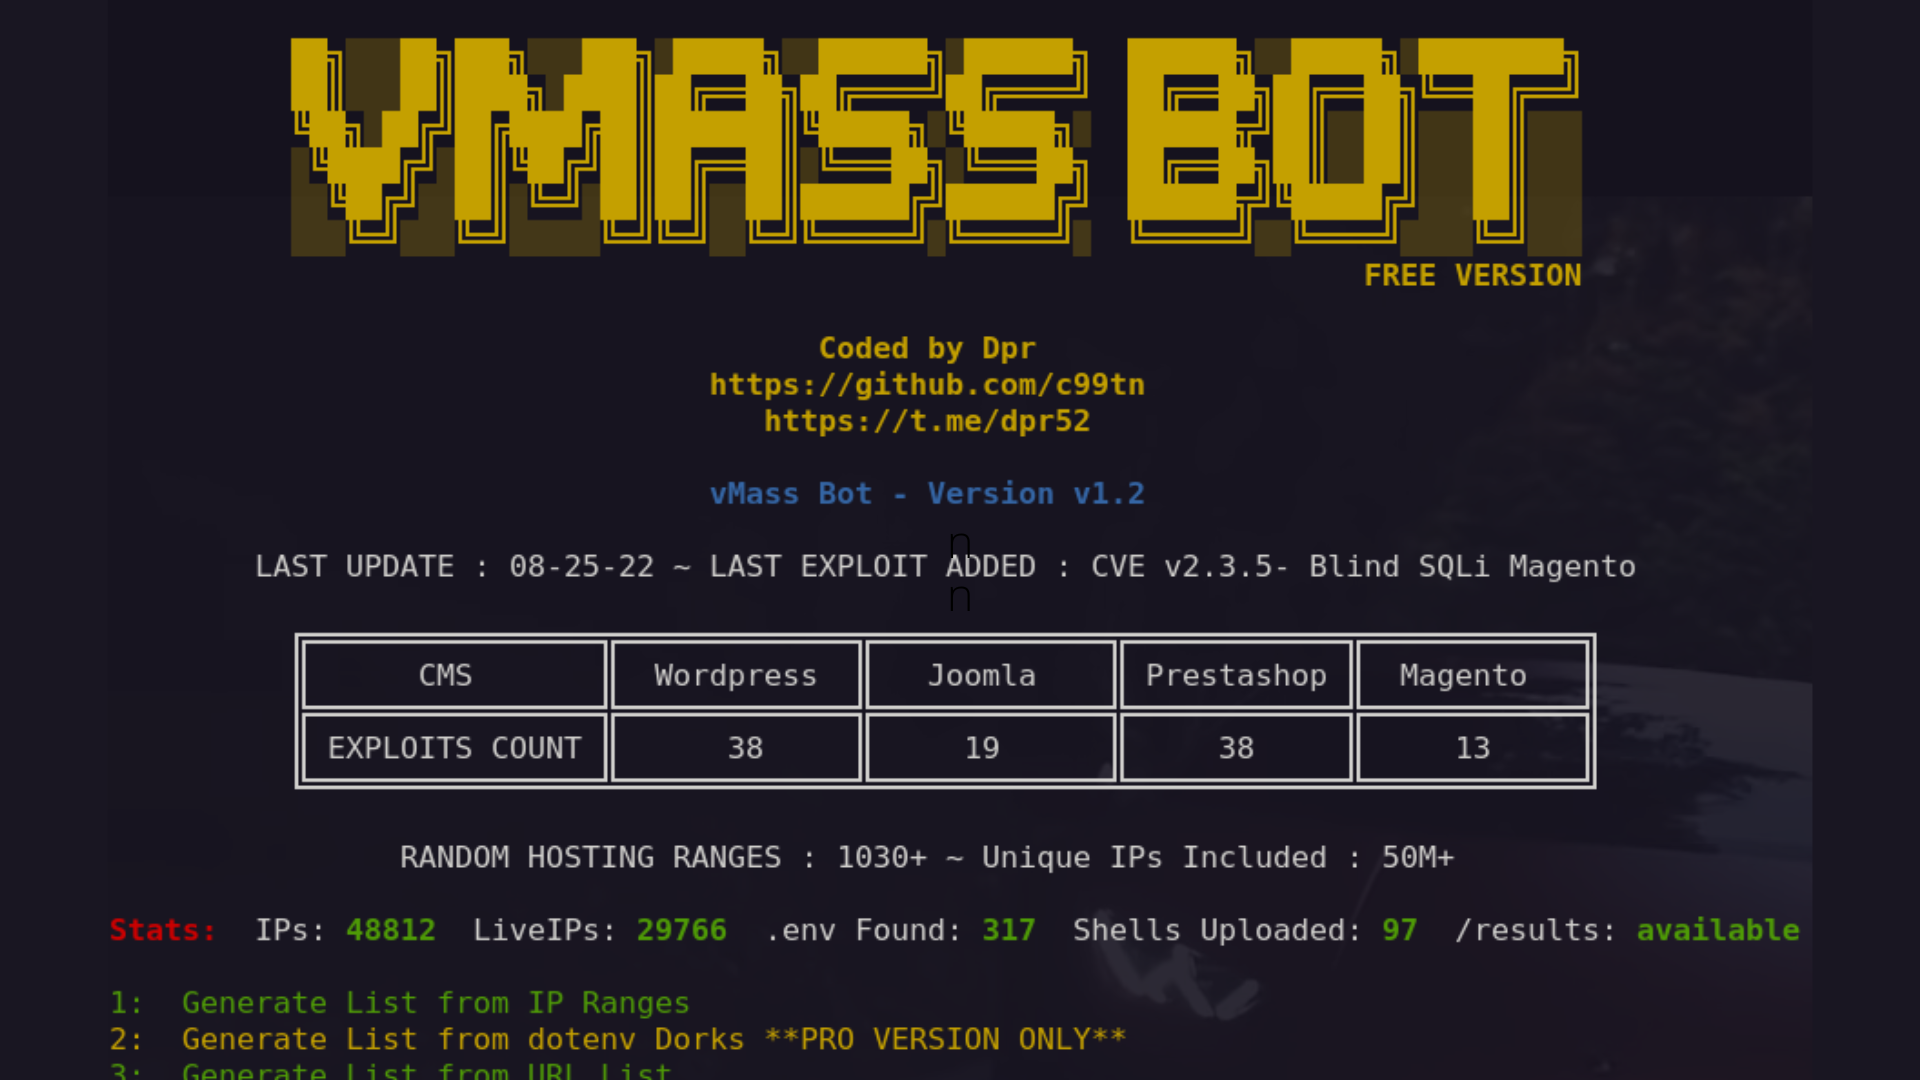 vMass Bot is a Free Vulnerability Scanner & Auto Exploiter Tool Written in Perl.